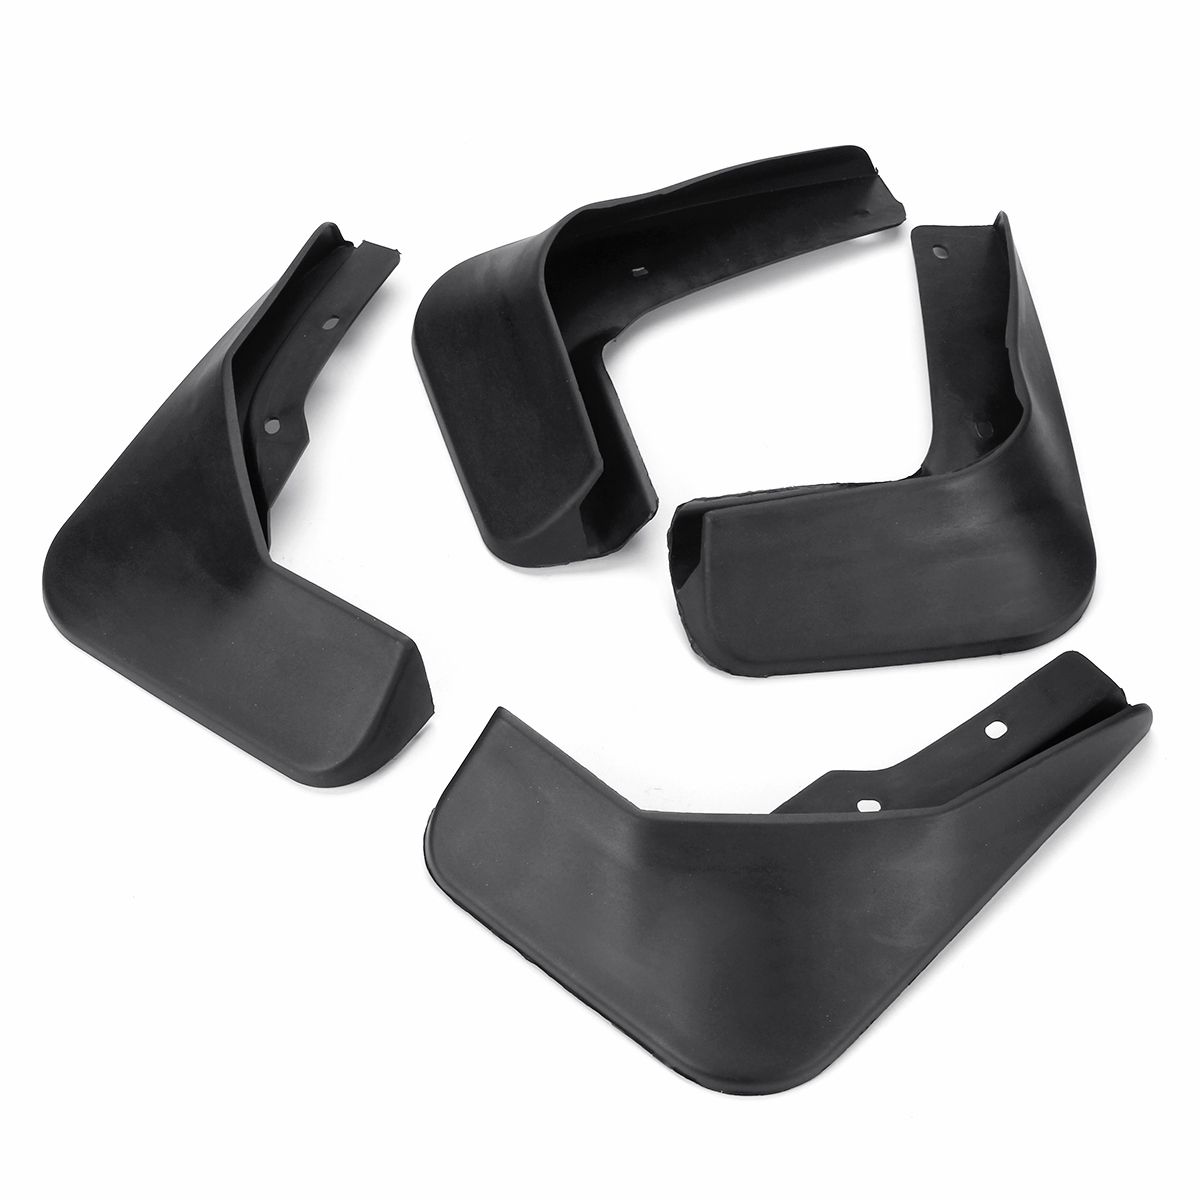 4Pcs-Car-Front-and-Rear-Mud-Flaps-Black-Plastic-Mudguards-for-VW-Jetta-2015-2017-1326693